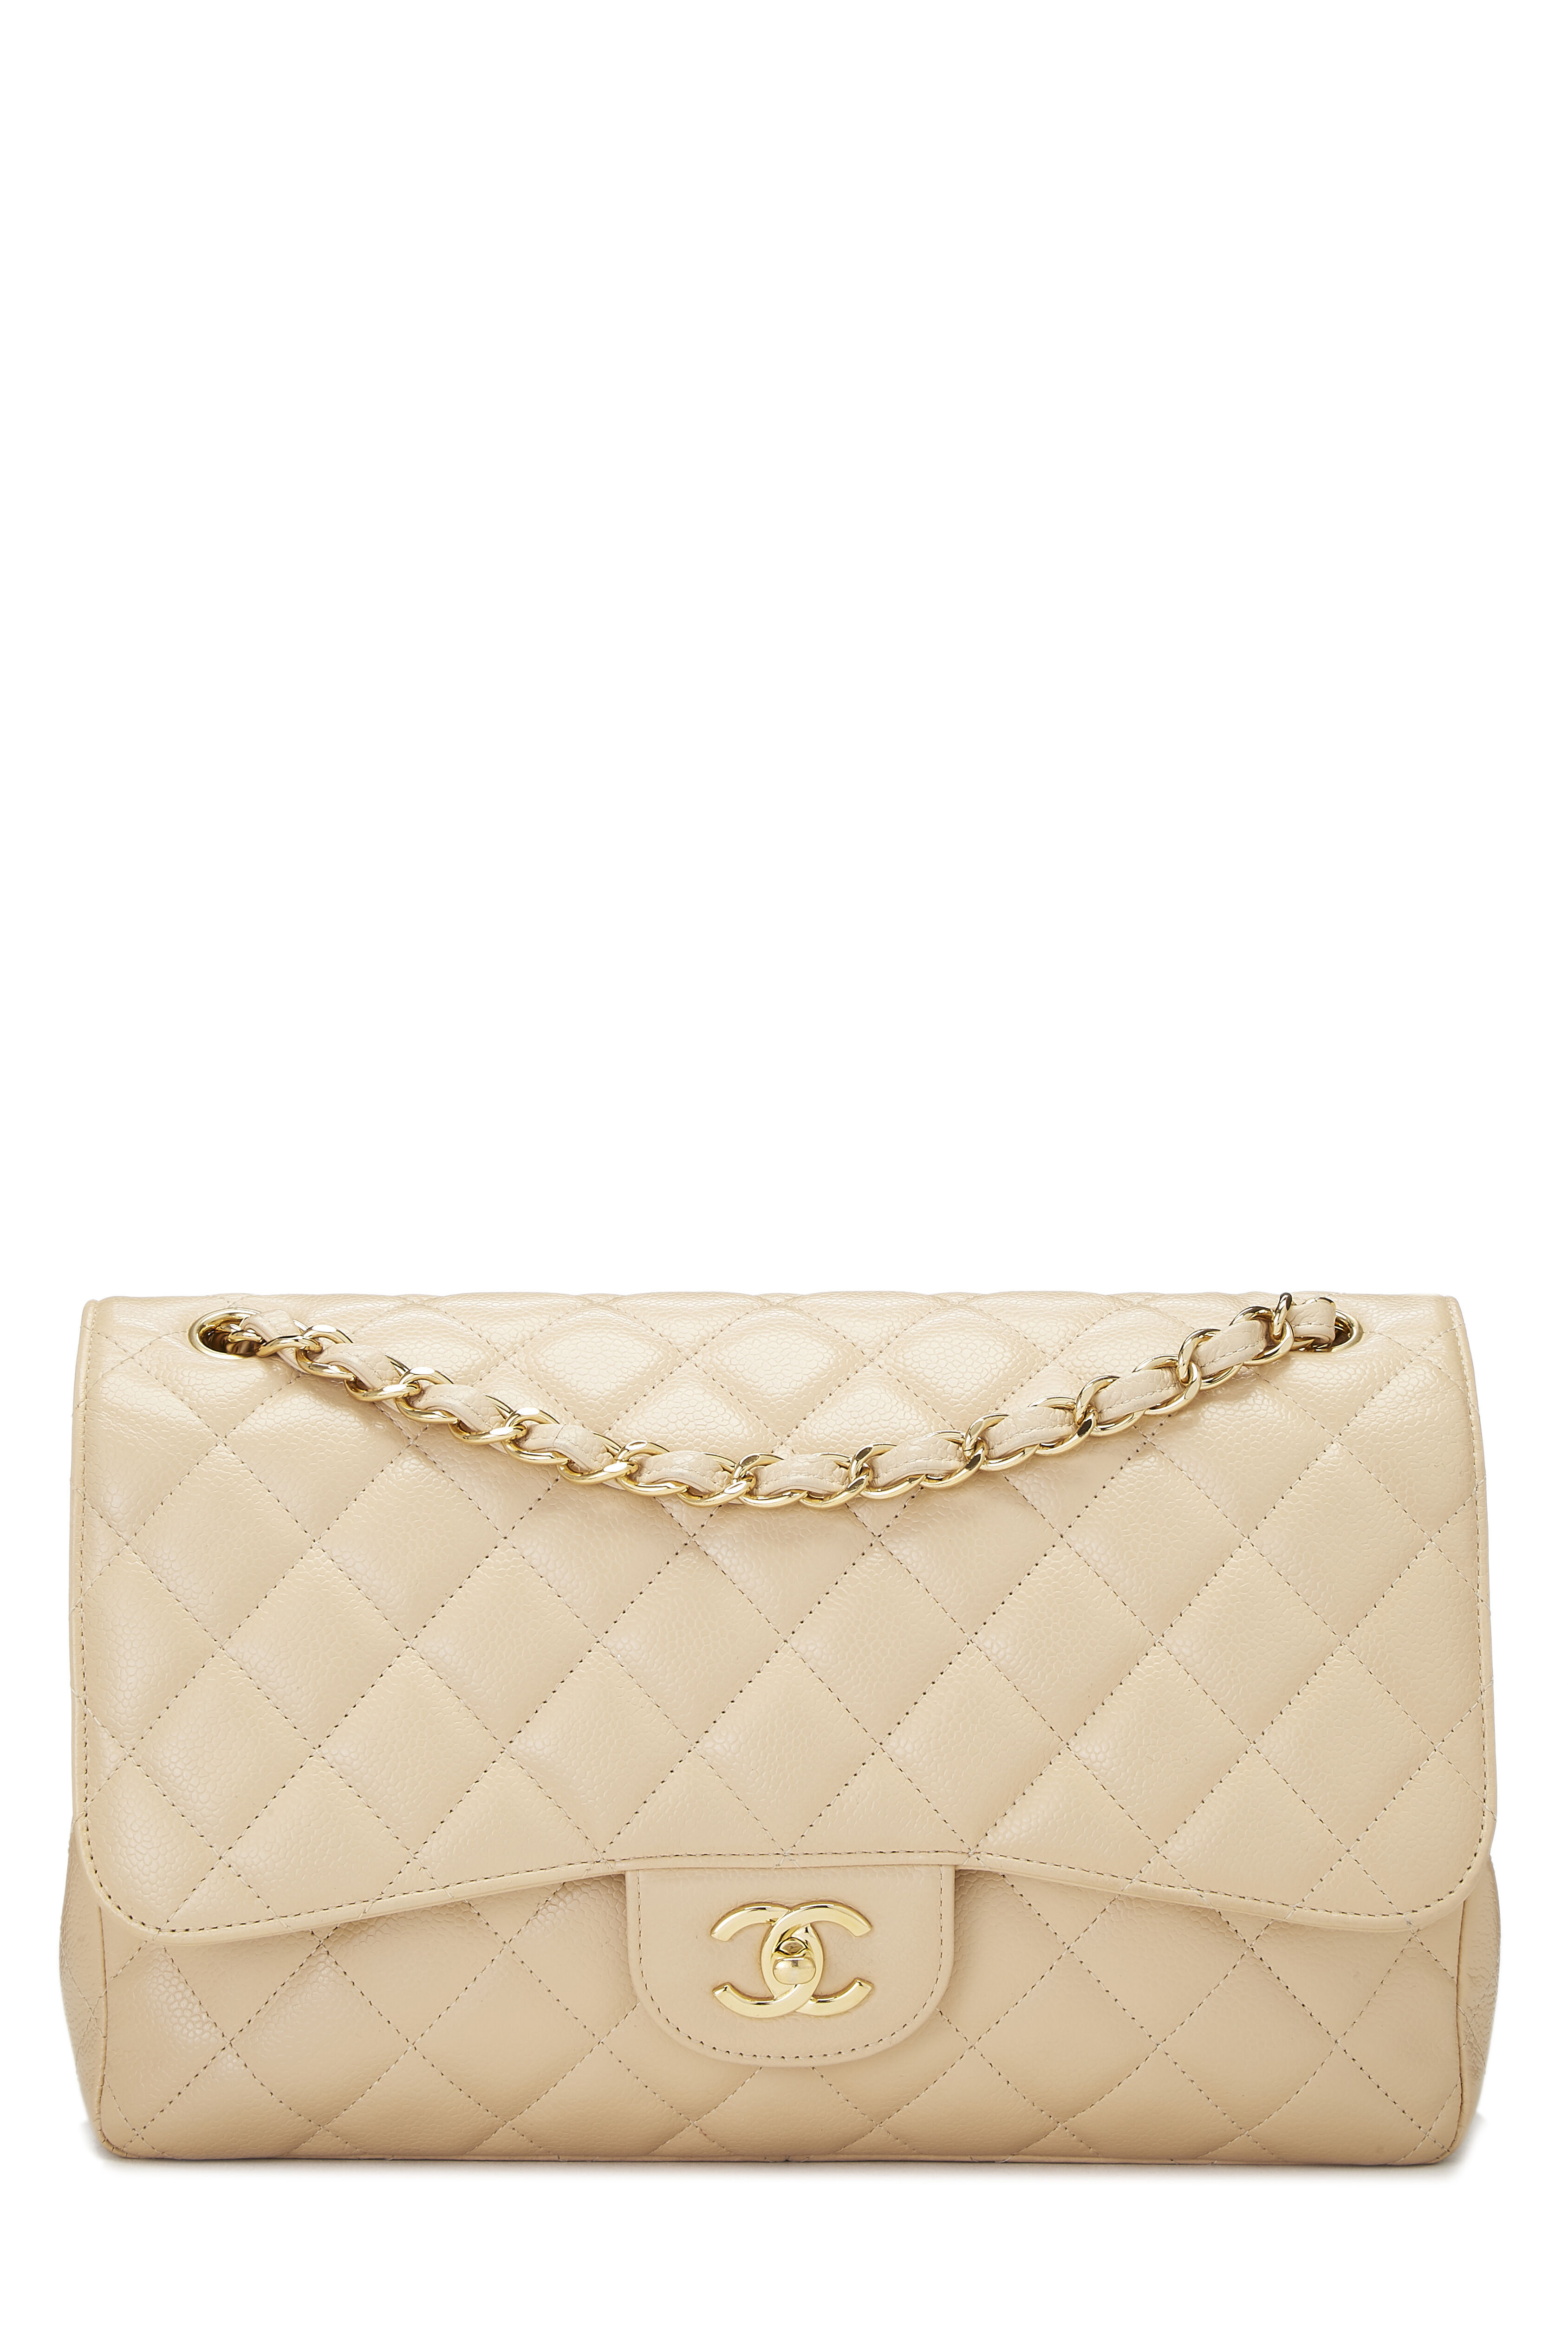 Chanel LIKE NEW White Caviar Leather Quilted Classic Double Flap Jumbo Bag  For Sale at 1stDibs  white chanel double flap bag chanel classic white  caviar white chanel jumbo bag